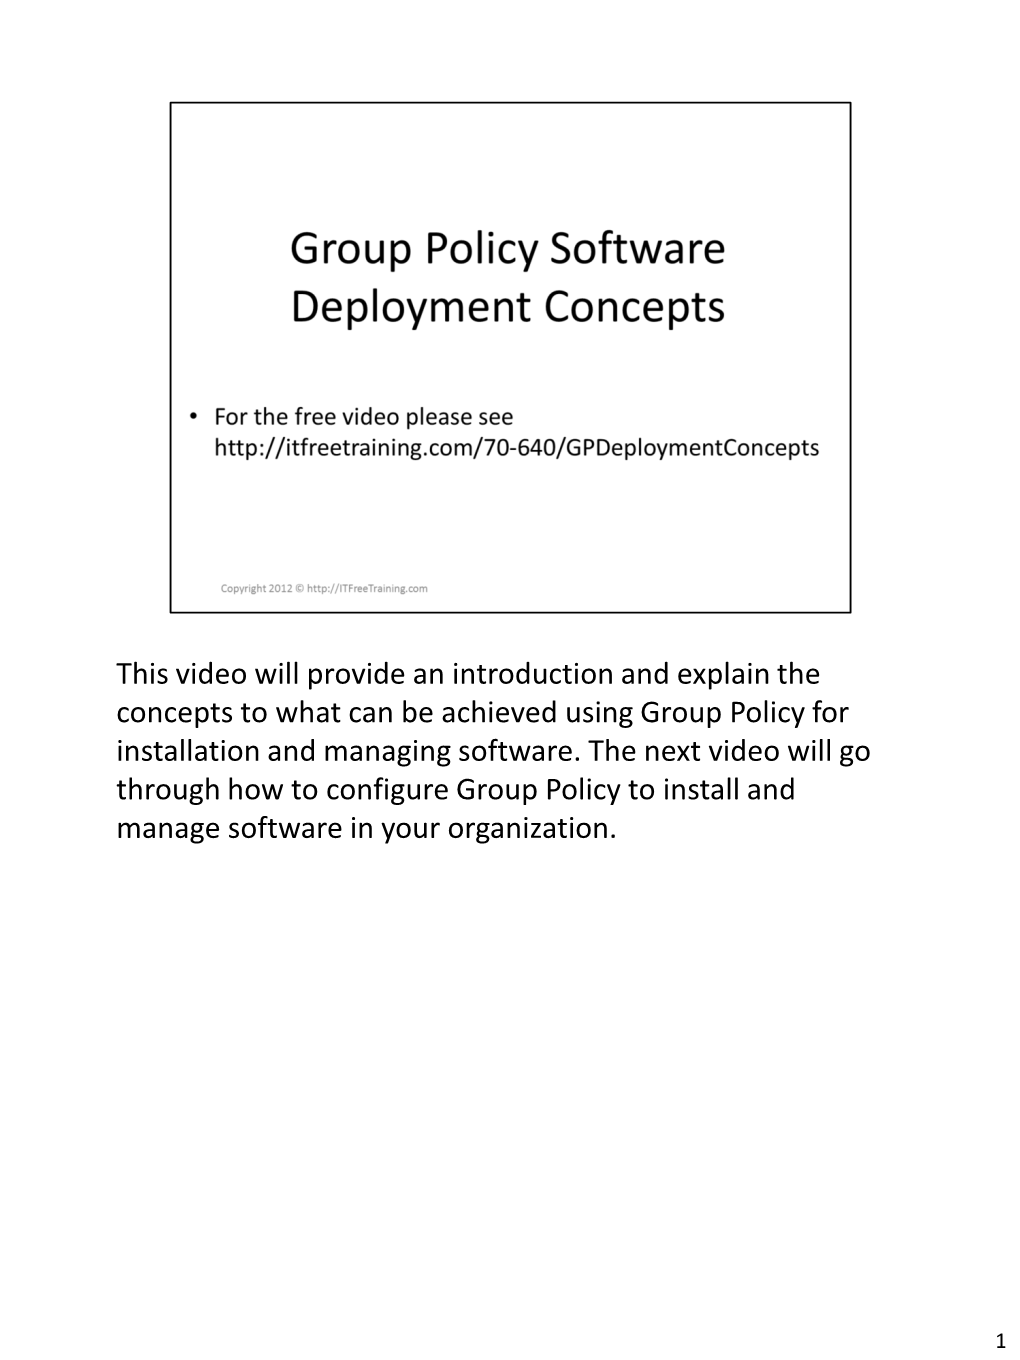 This Video Will Provide an Introduction and Explain the Concepts to What Can Be Achieved Using Group Policy for Installation and Managing Software